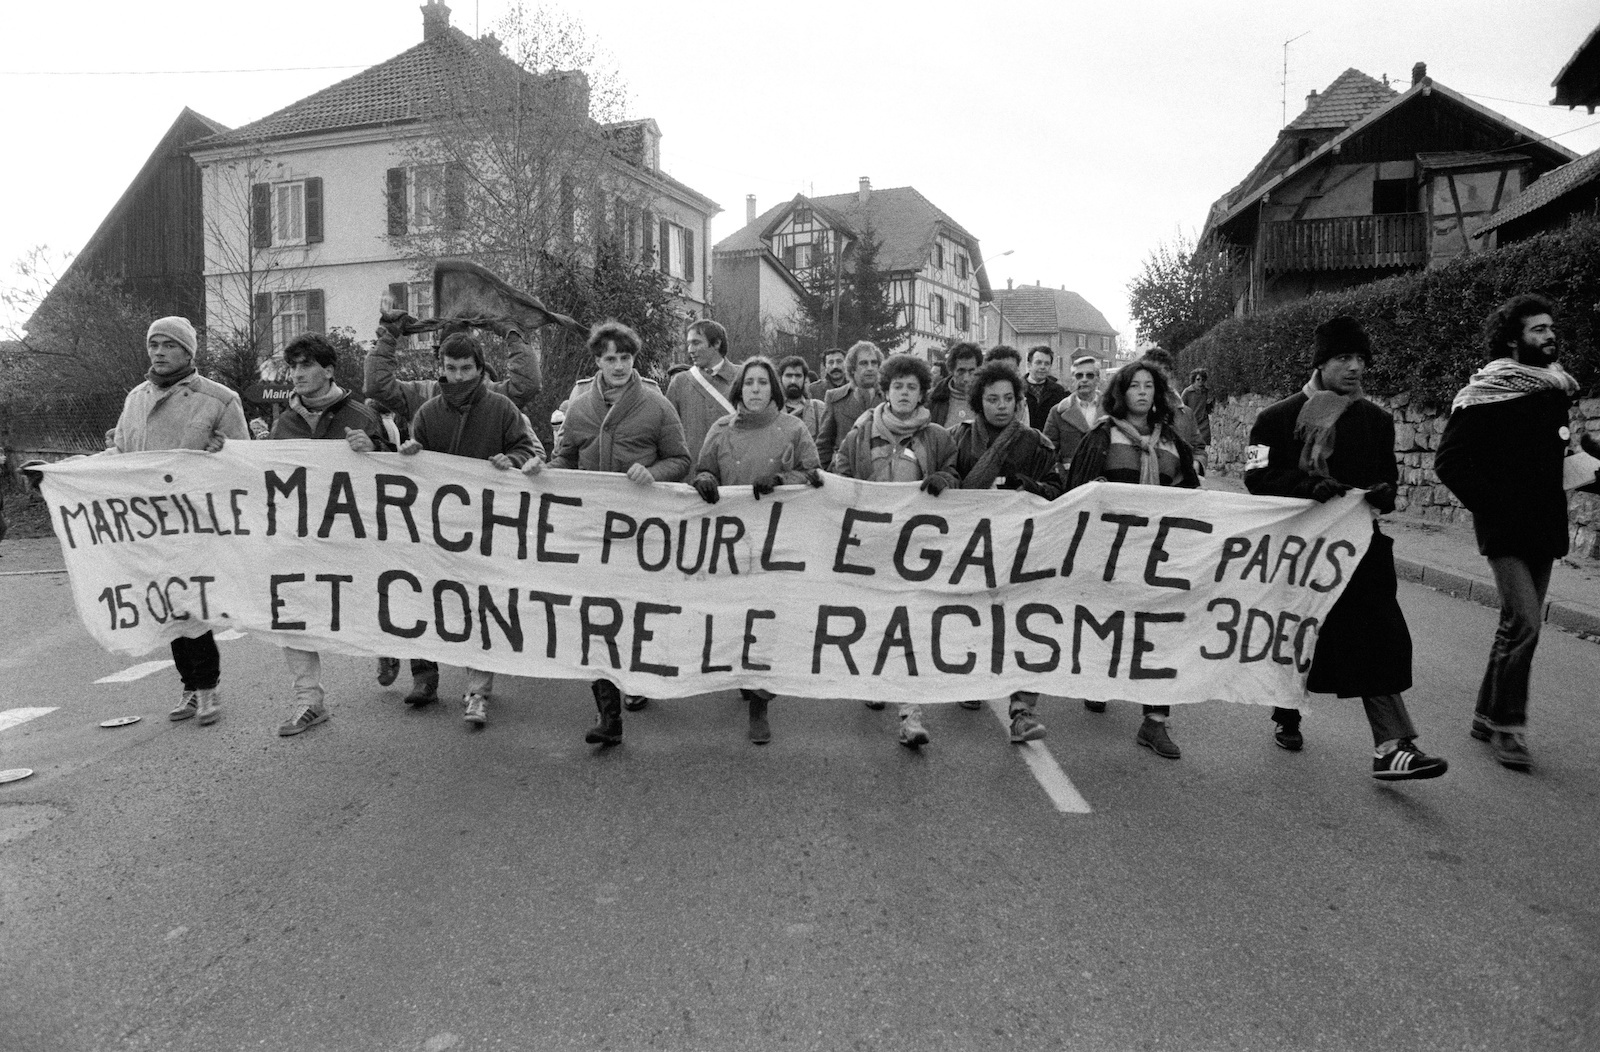 The March for Equality and Against Racism in Mulhouse, Alsace, November 1983. Getty Images.